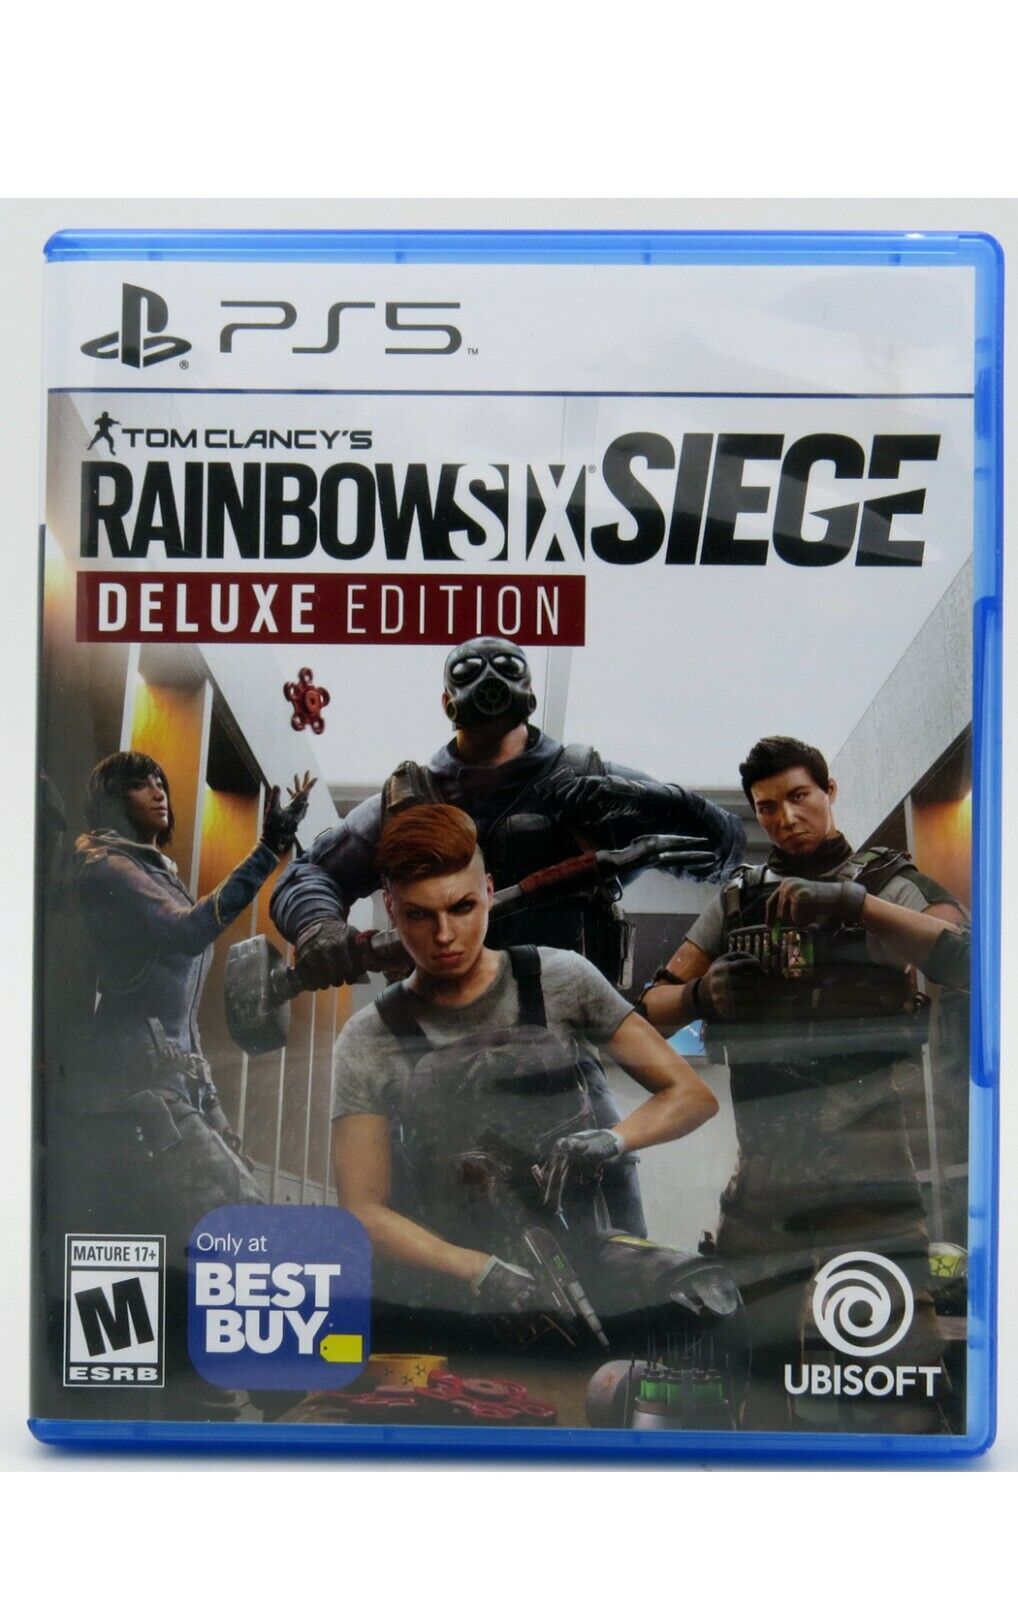 5 Tom Deluxe Siege Y Mas Used Six PS5 – Edition Rainbow Sony Clancy\'s PlayStation – Tacos –